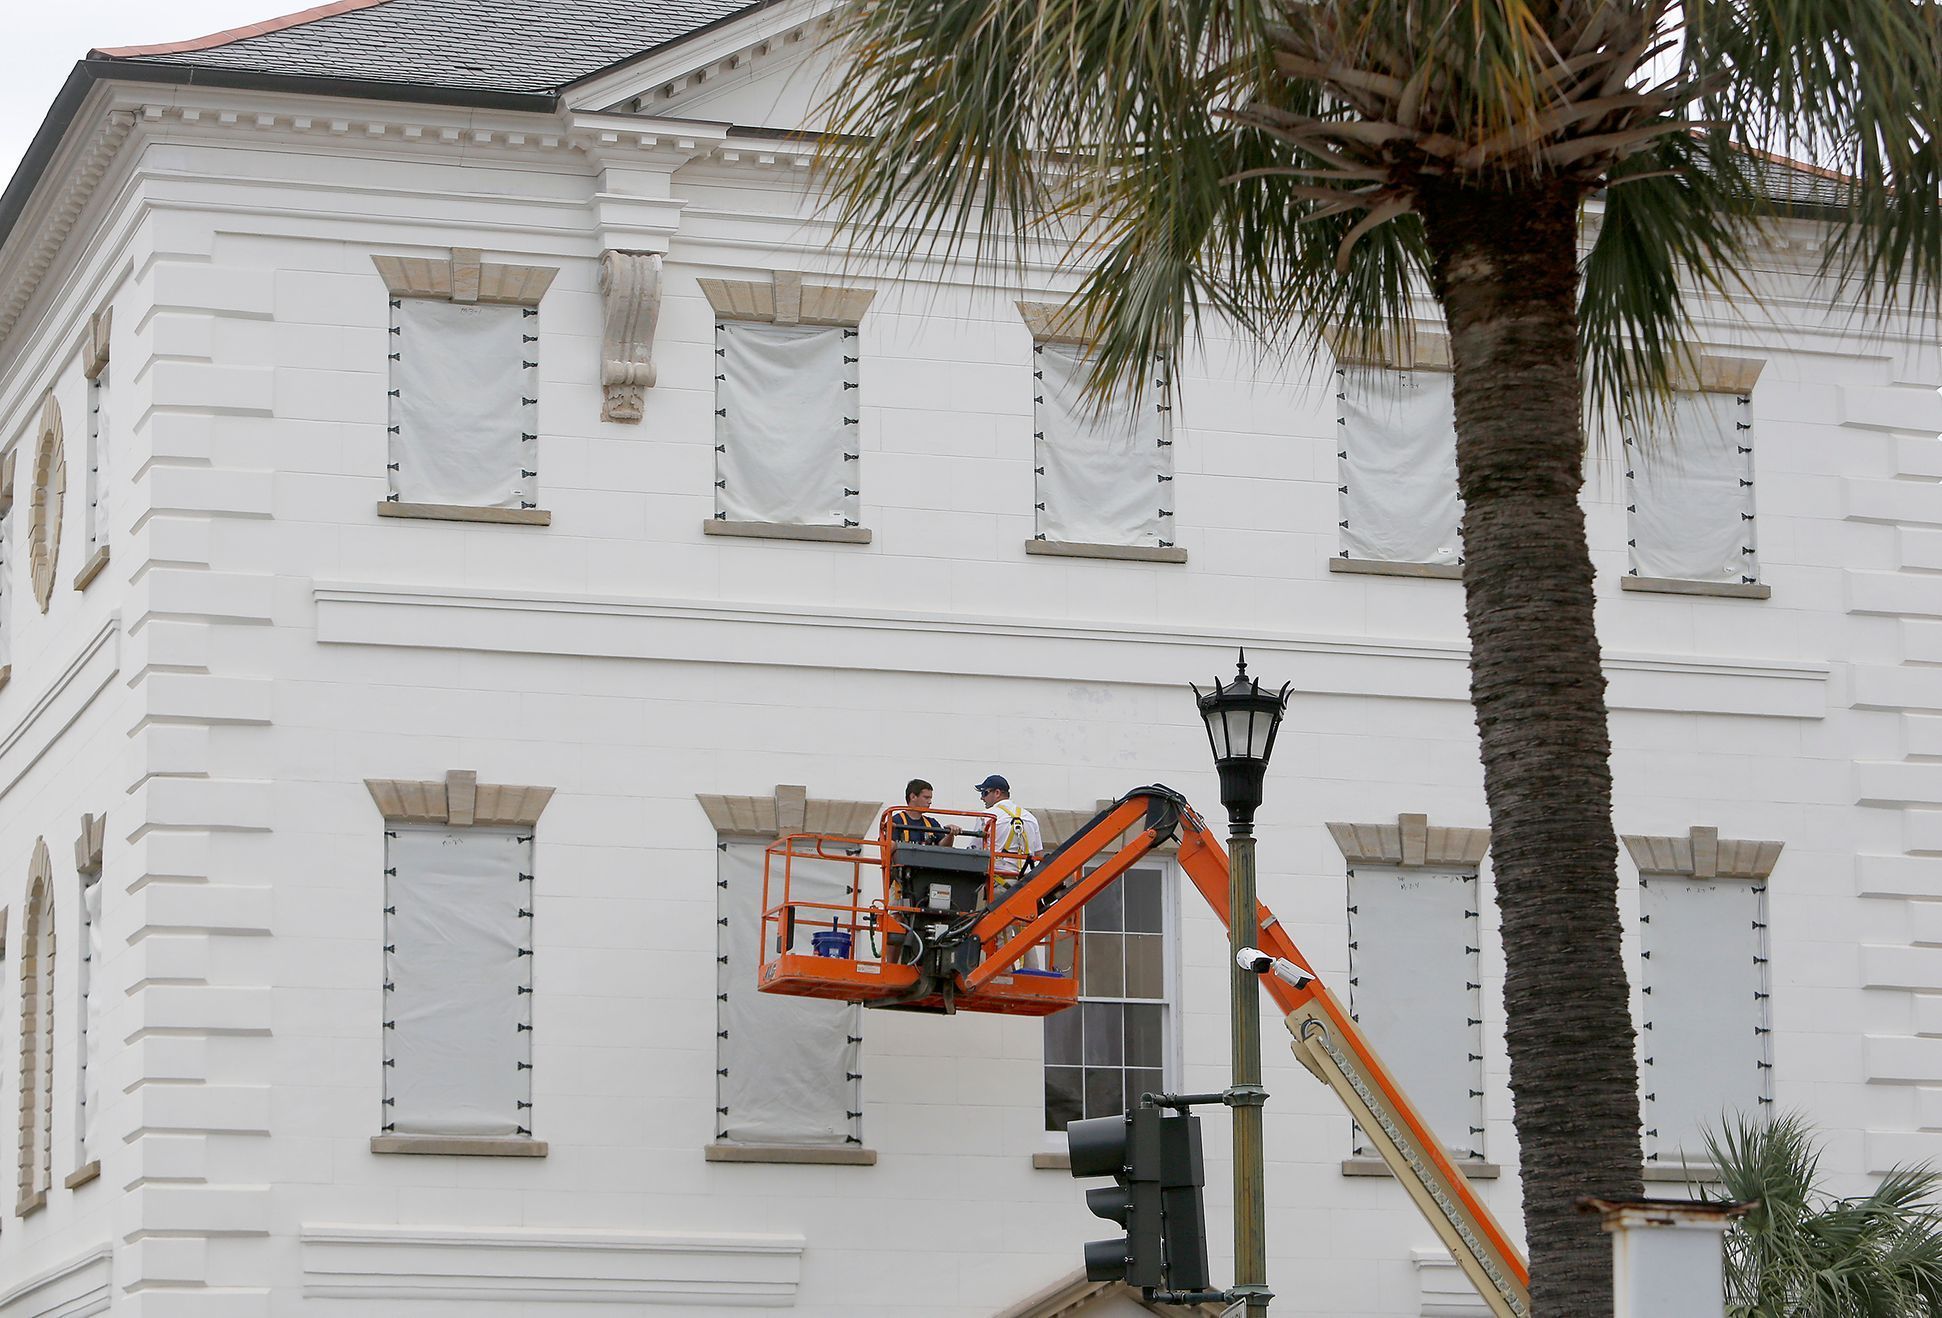 Workers cover the windows of the historic Charleston County Courthouse in Charleston, S.C., in preparation for the advancing Hurricane Florence.